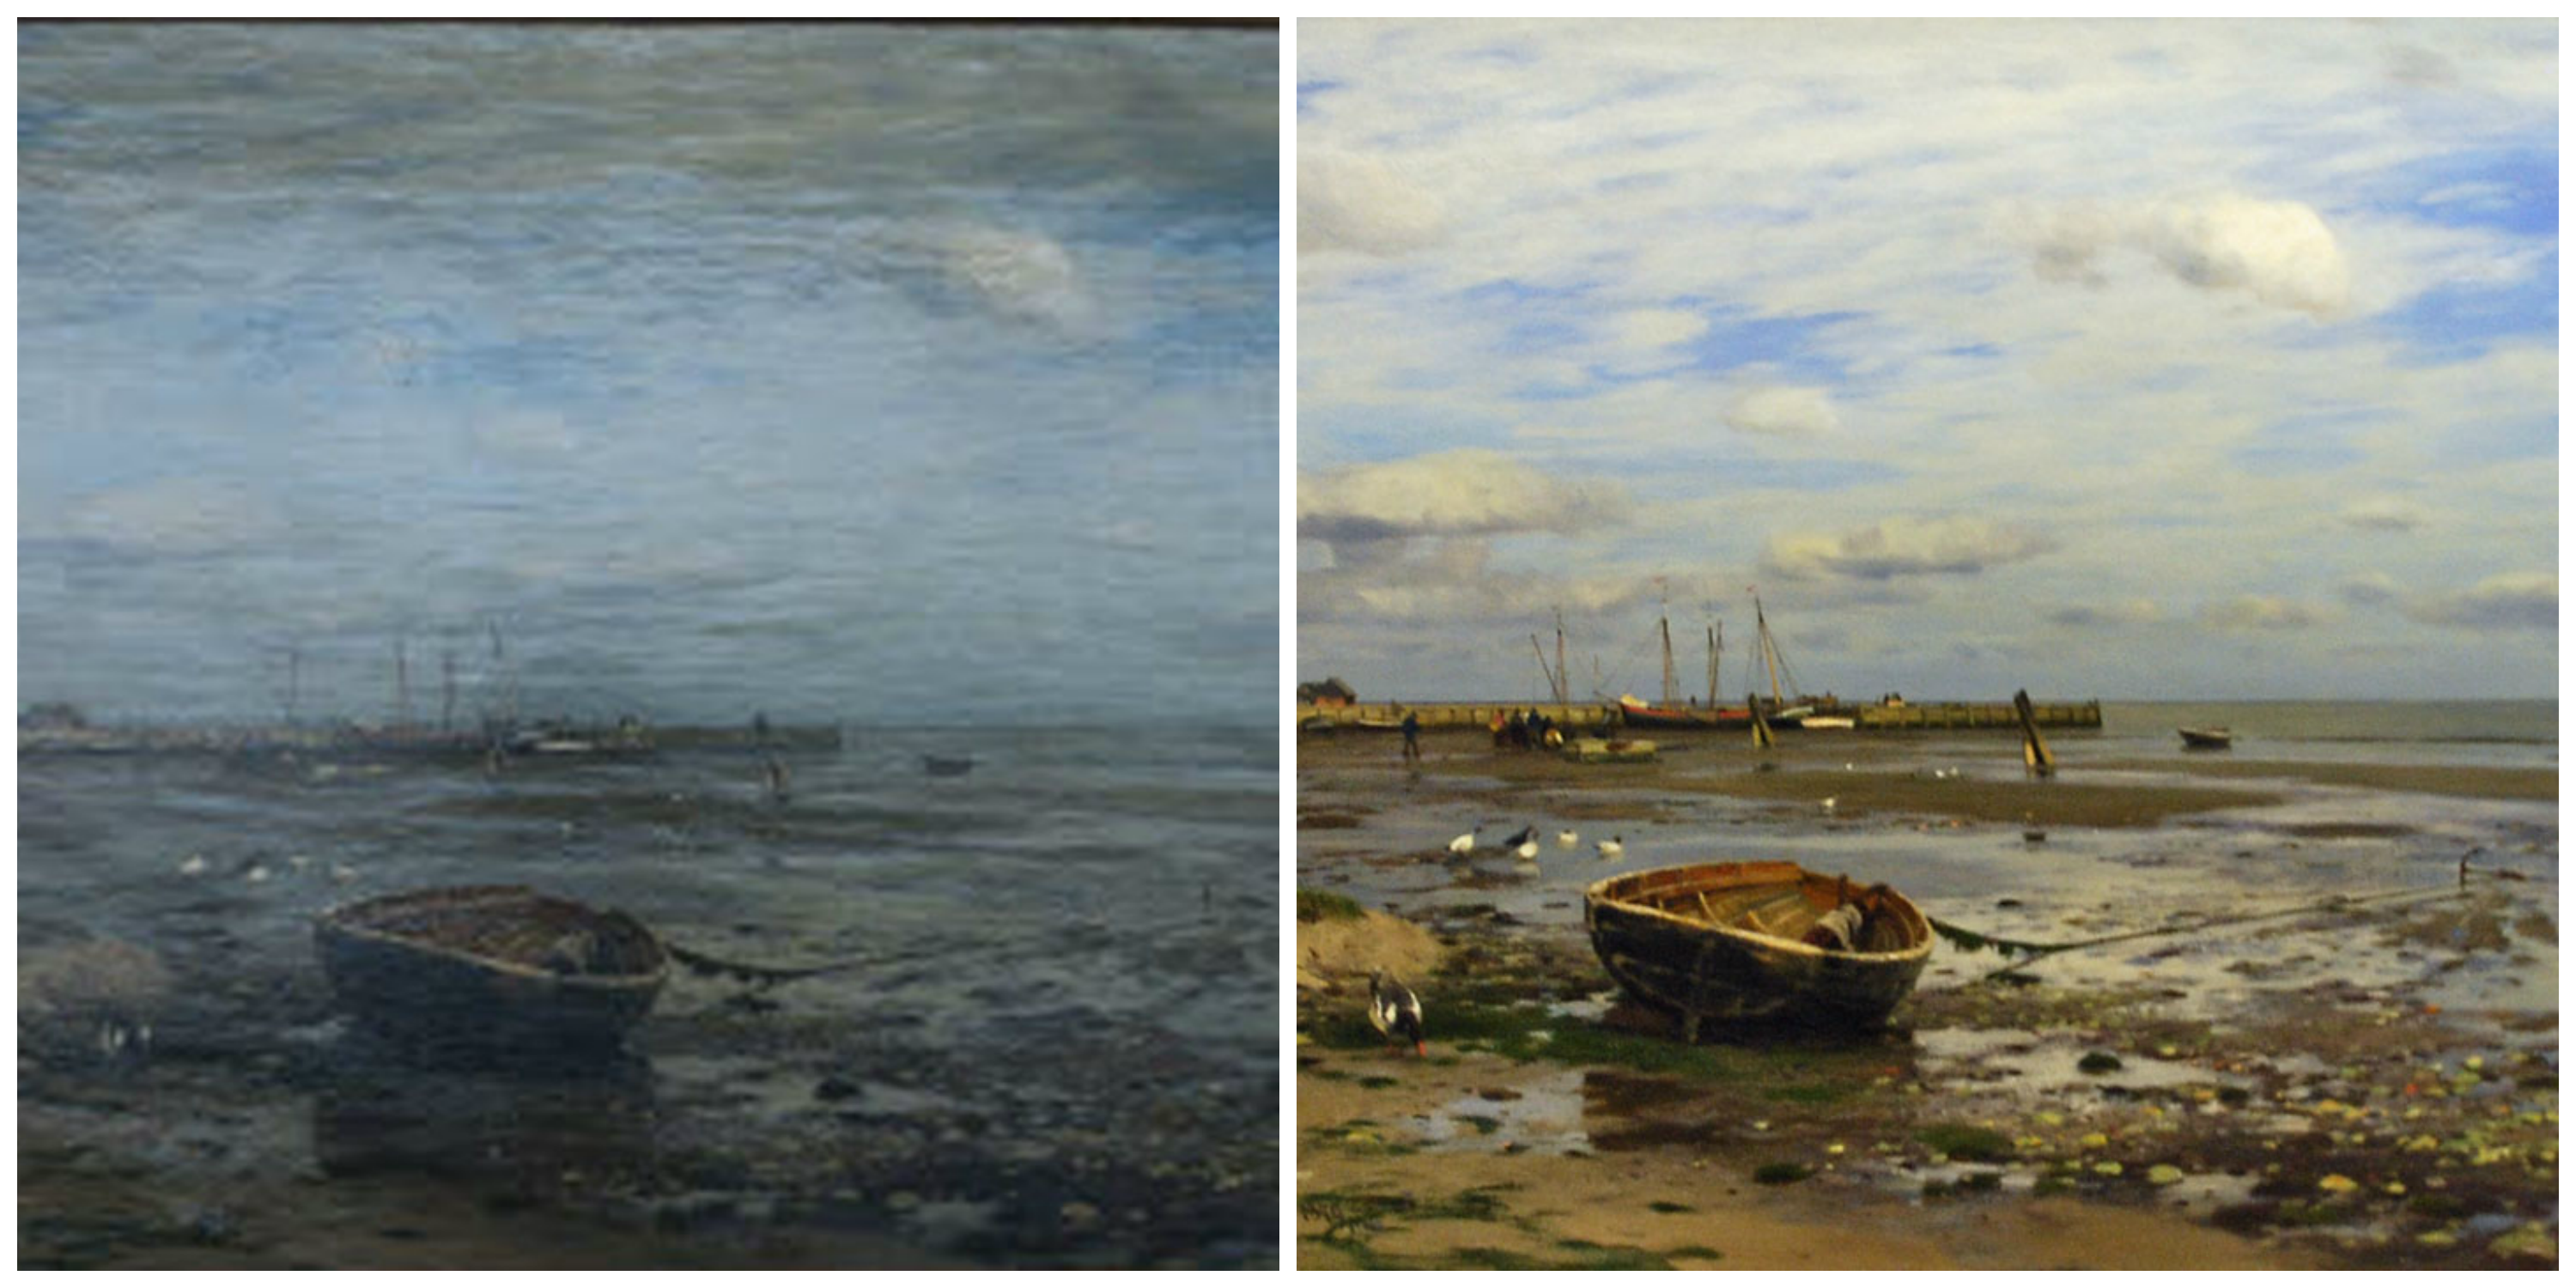 The “before” and “after” images of the painting “Isle of Sylt” (1879) by Eugene Gustav Dücker.